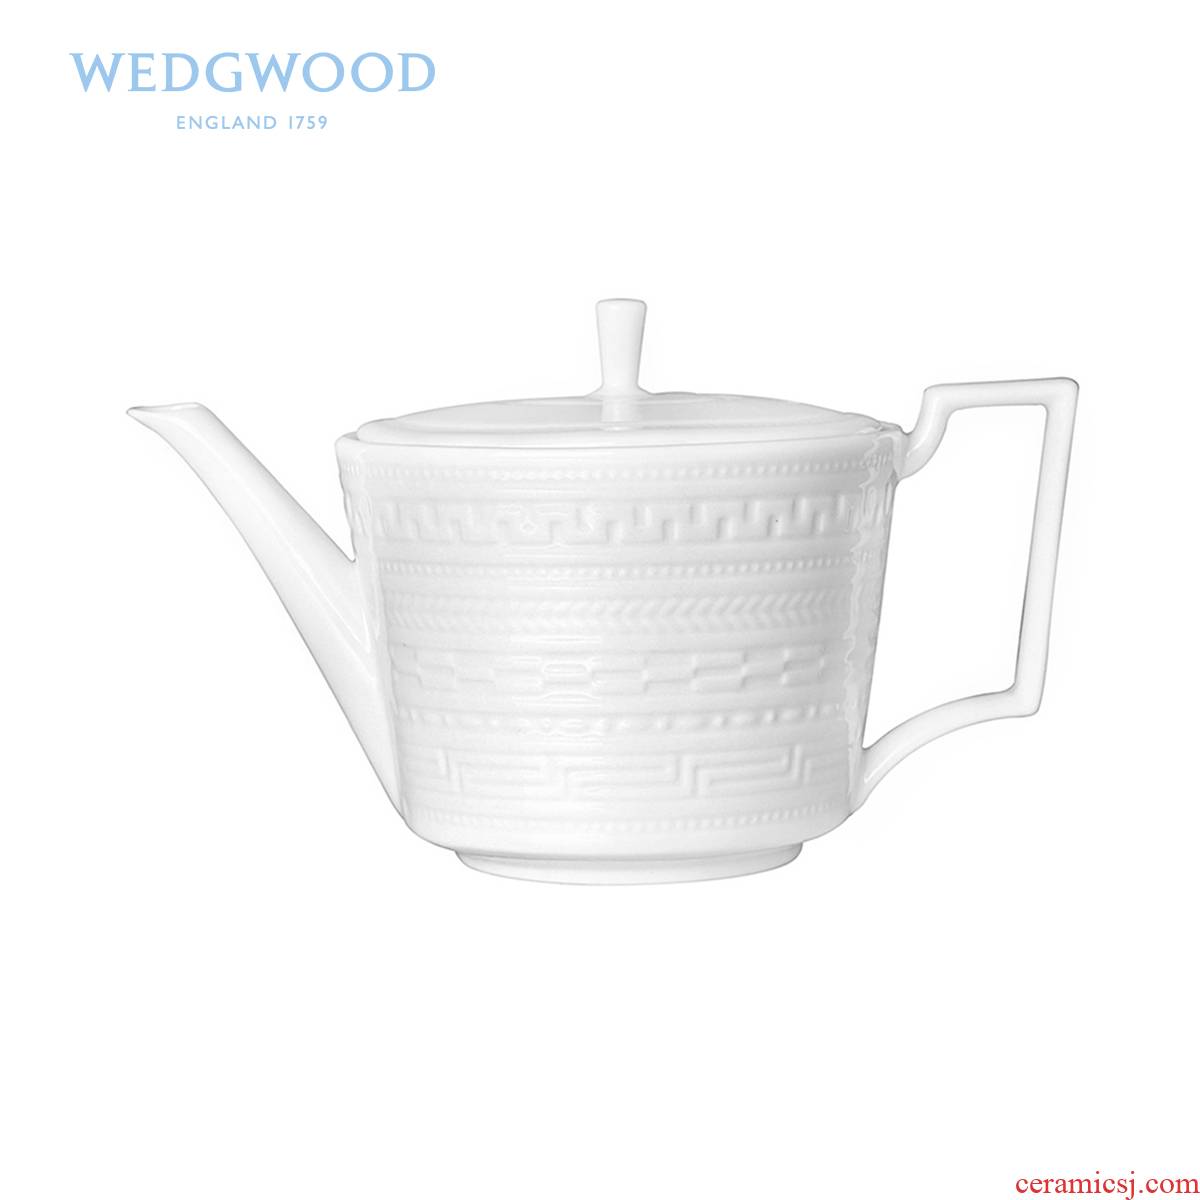 Wedgwood waterford Wedgwood Intaglio anaglyph ipads China 290 ml tea/coffee pot of gift boxes